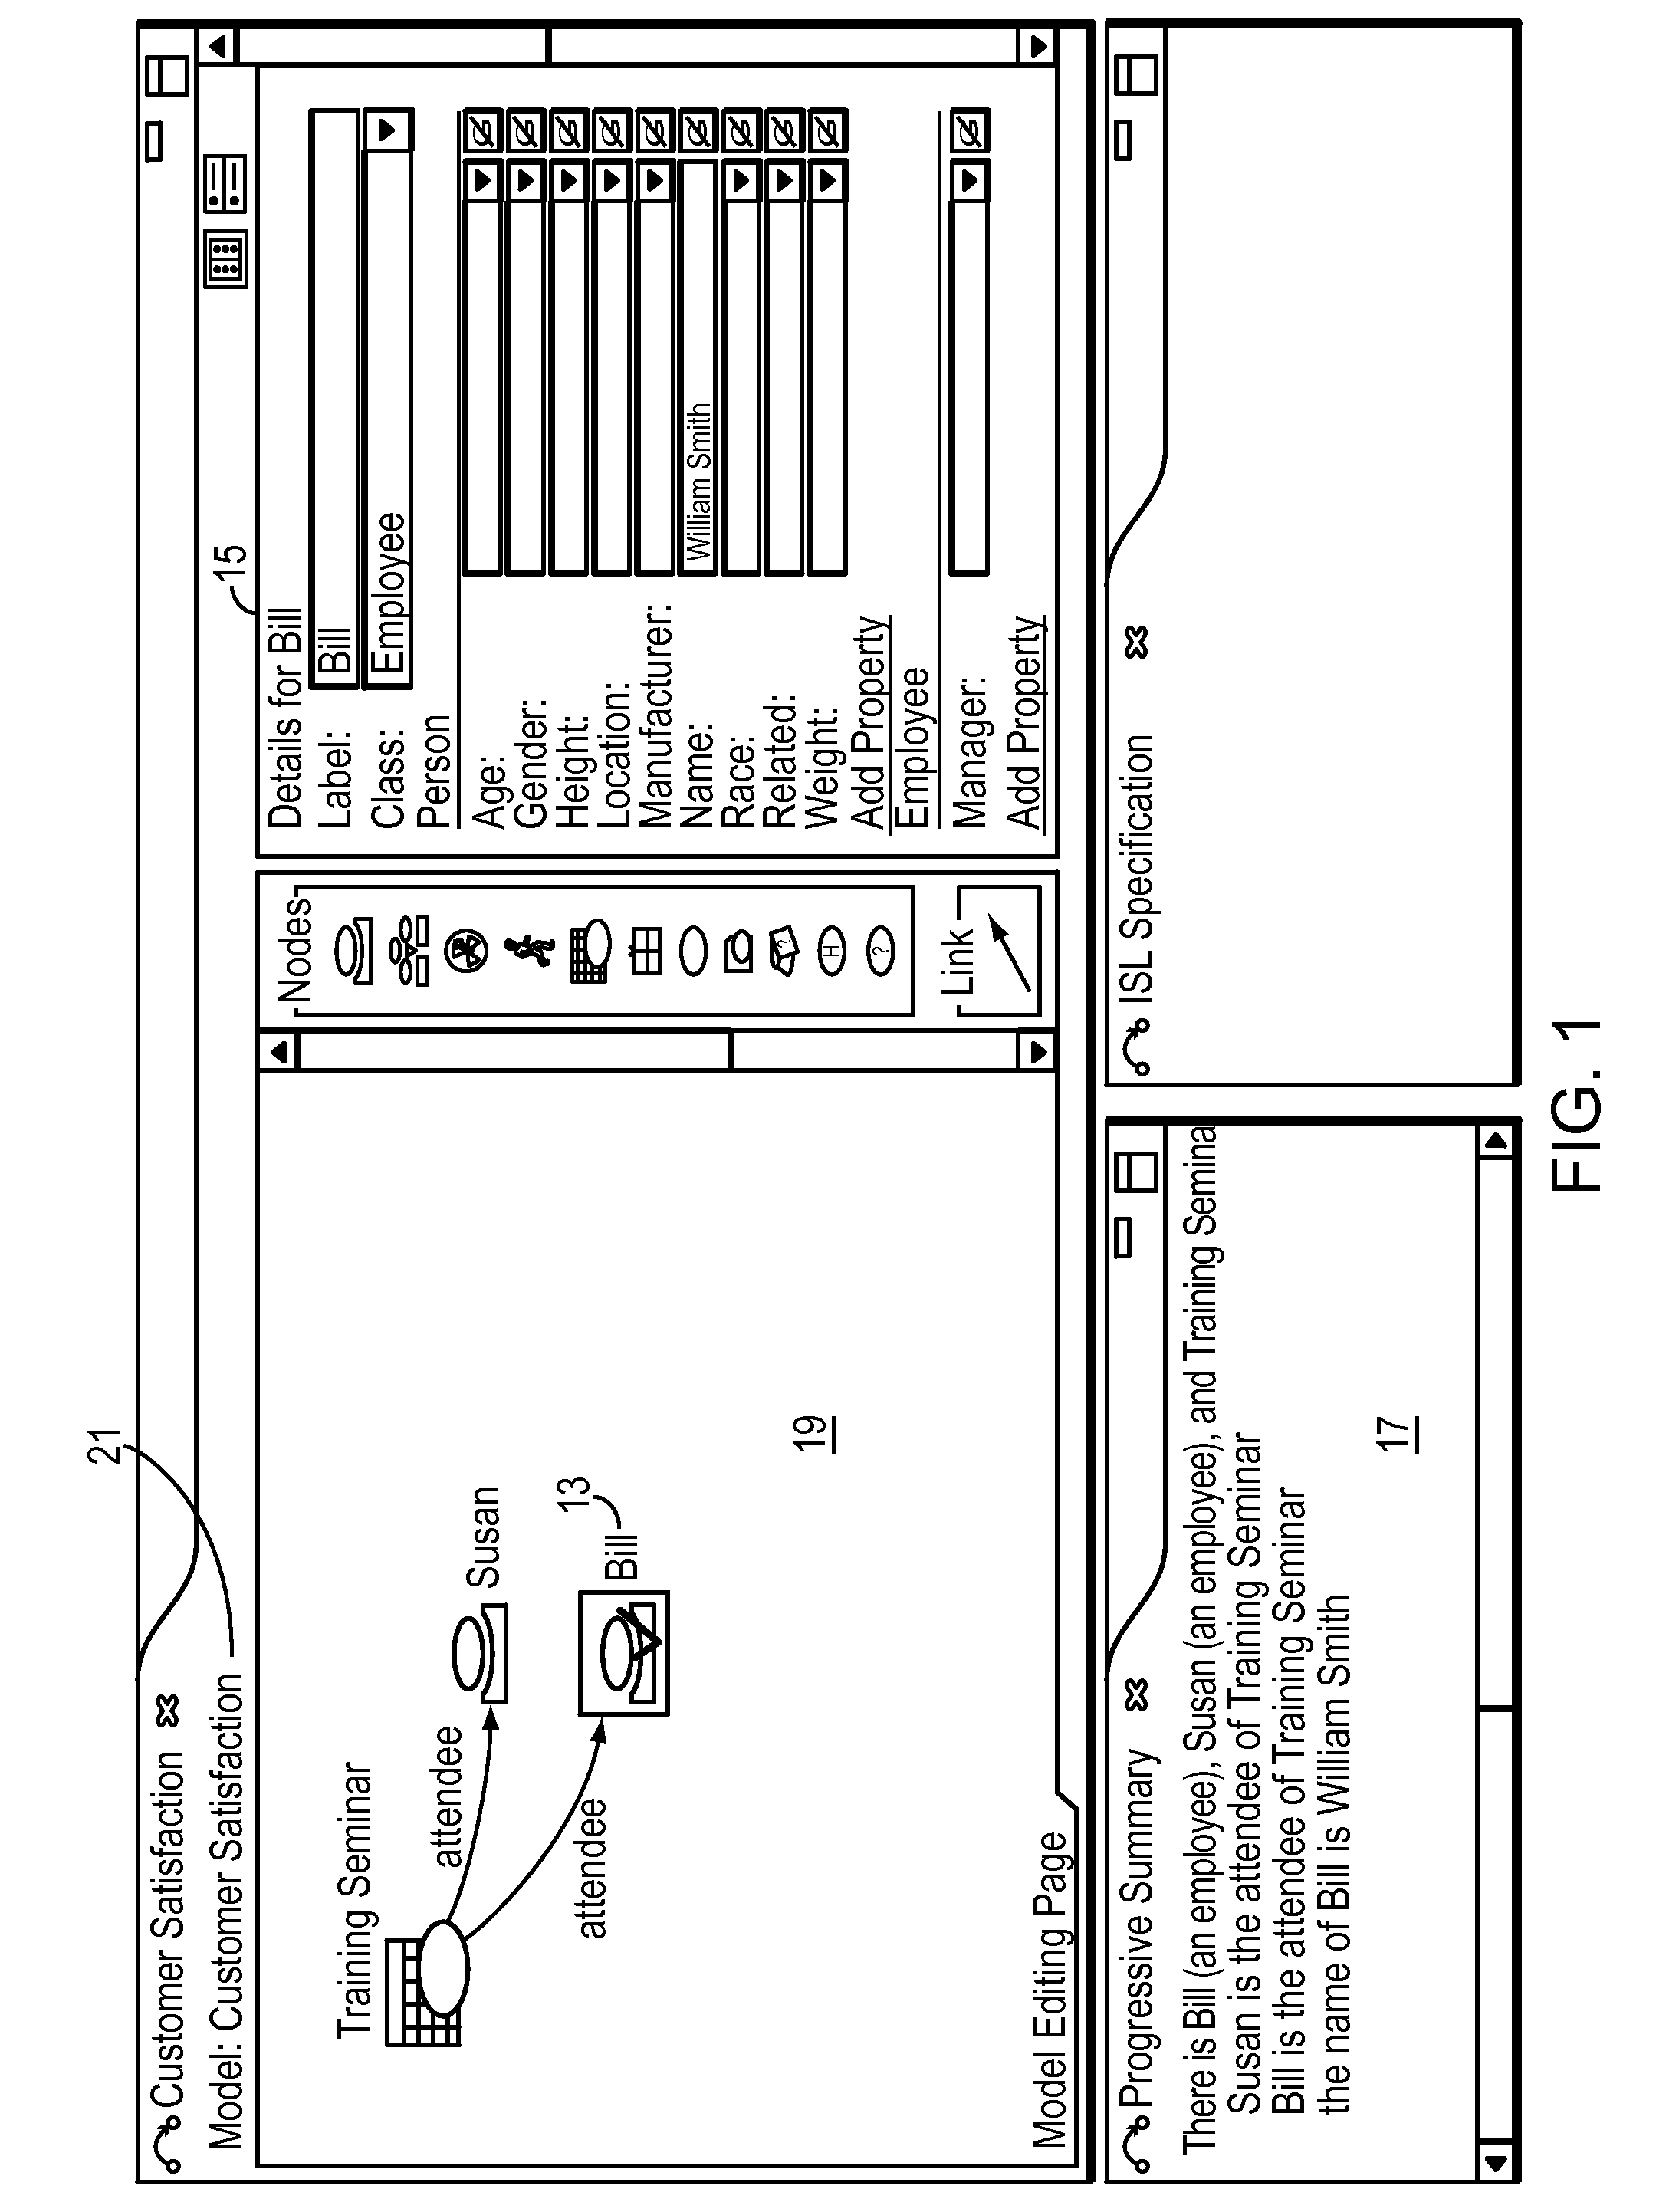 Computer method and apparatus for graphical inquiry specification with progressive summary